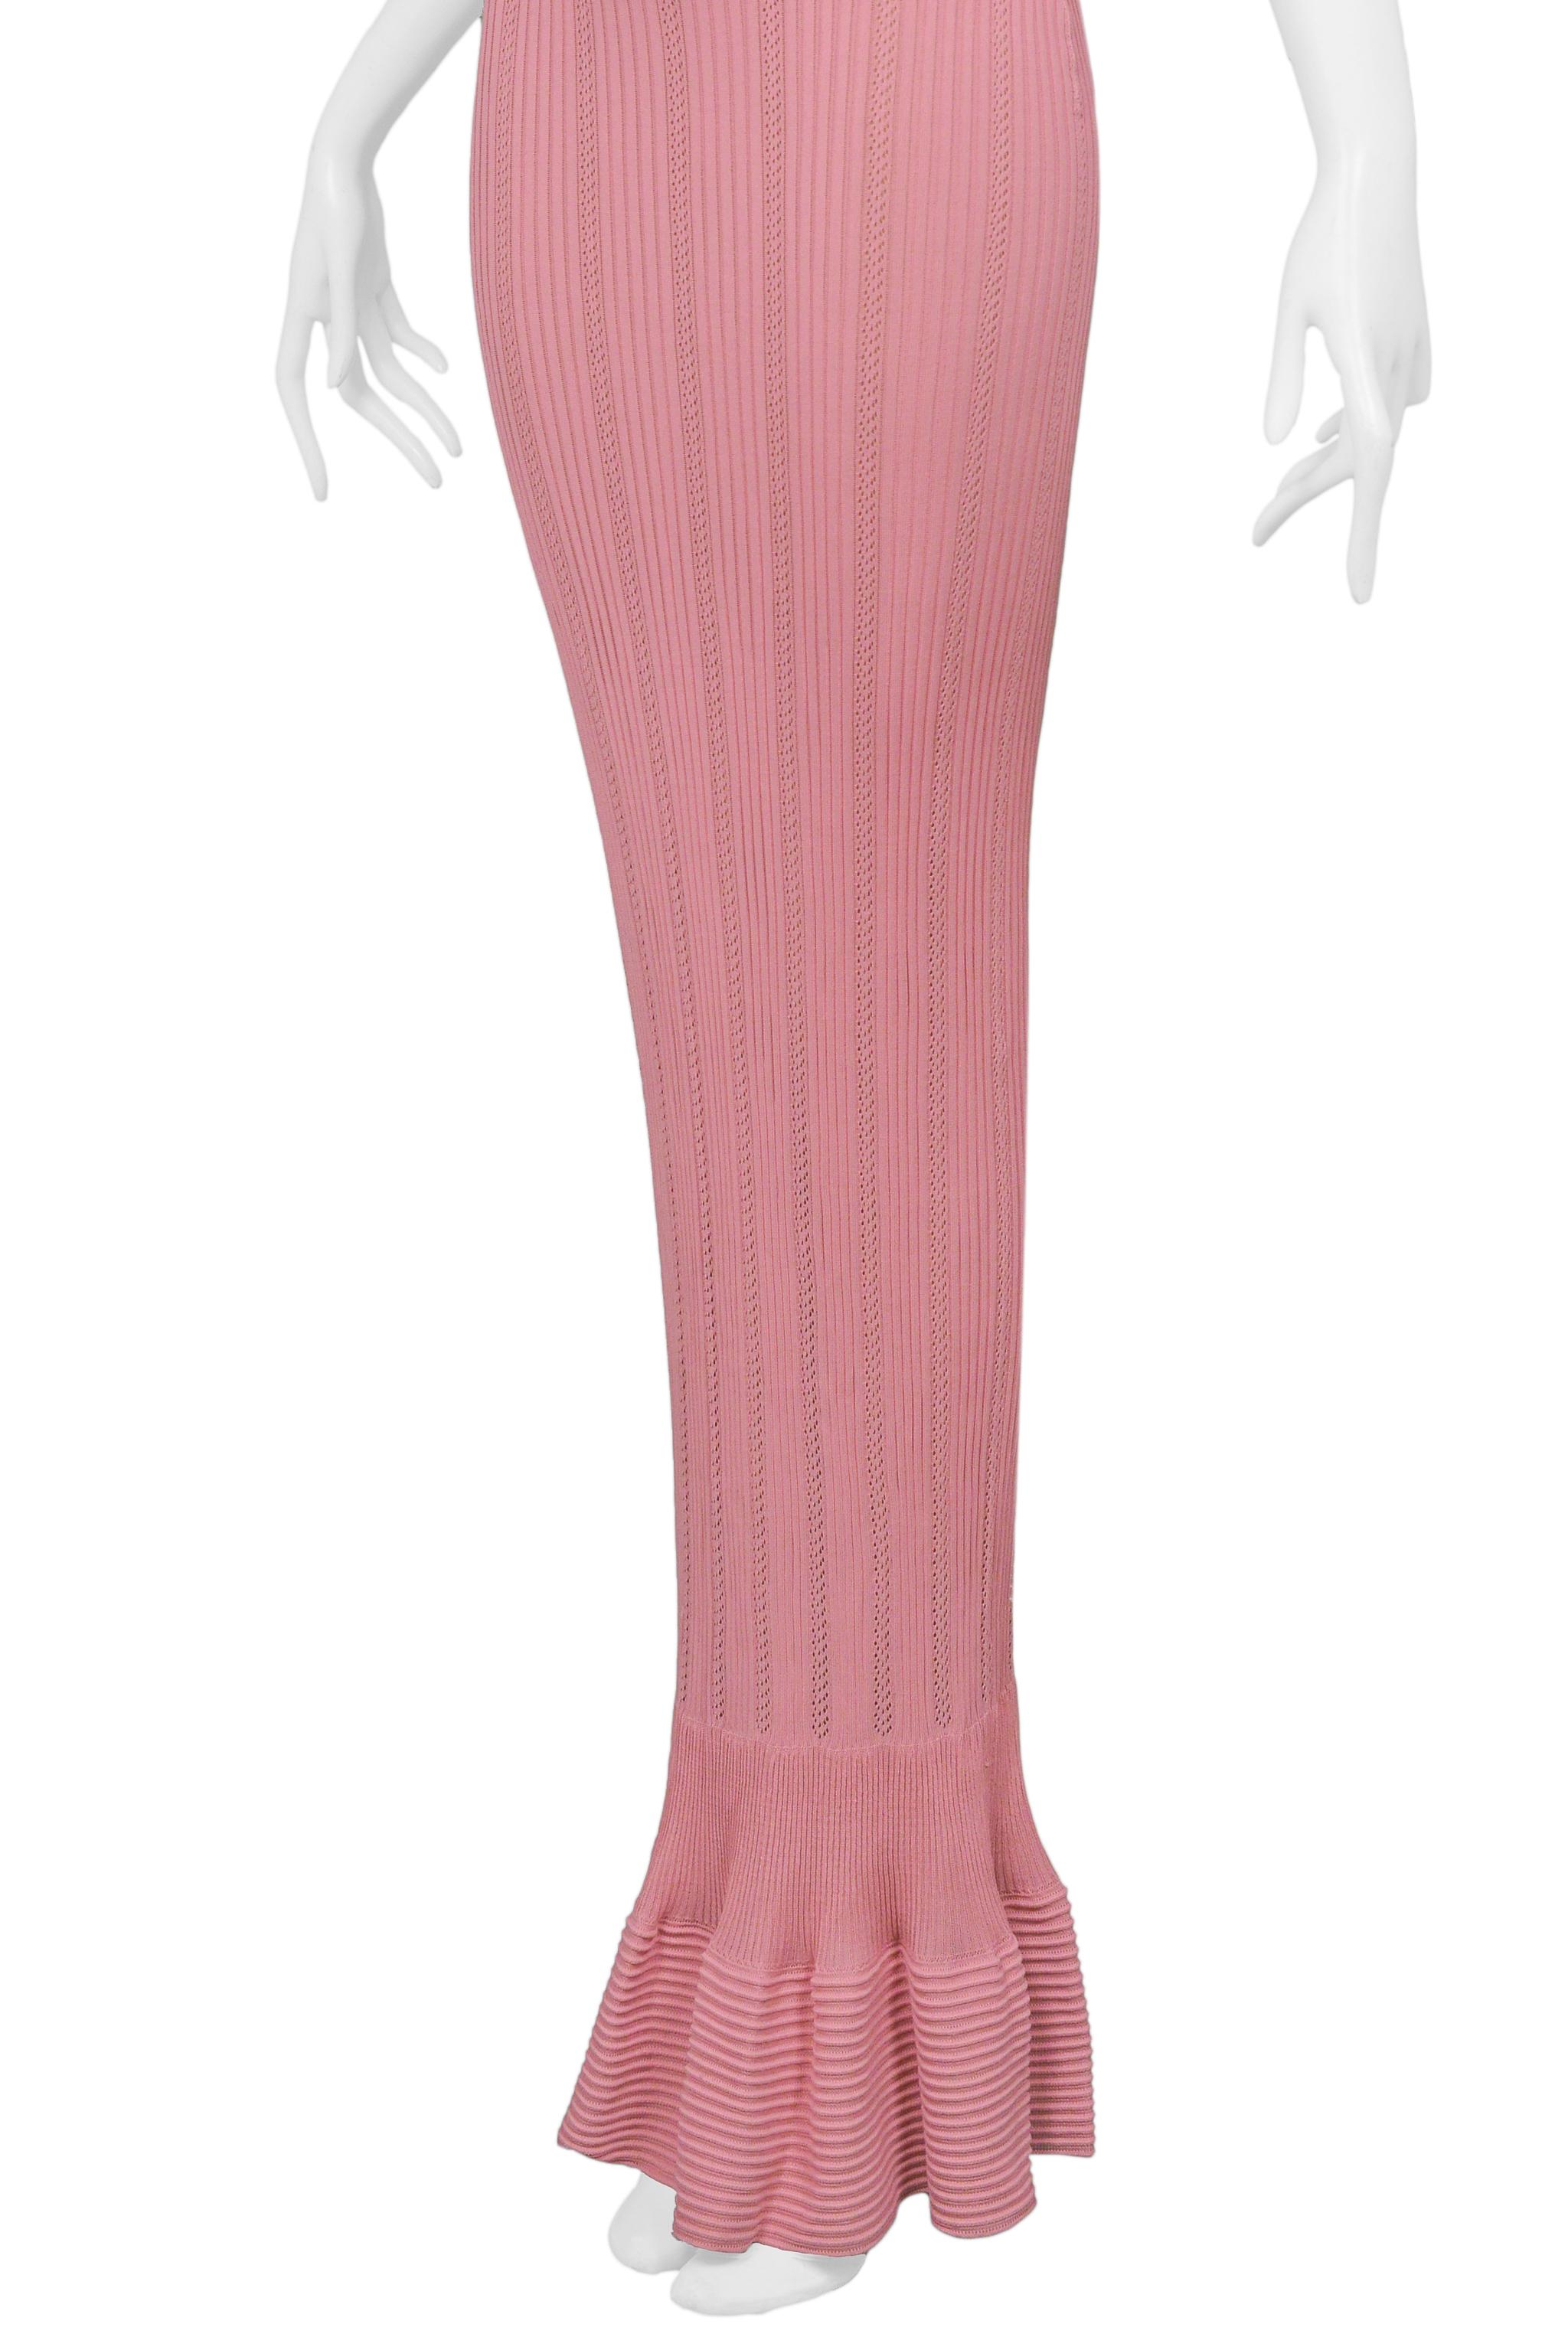 Alaia Pink Knit Bodycon Mermaid Dress SS 1996 For Sale 4